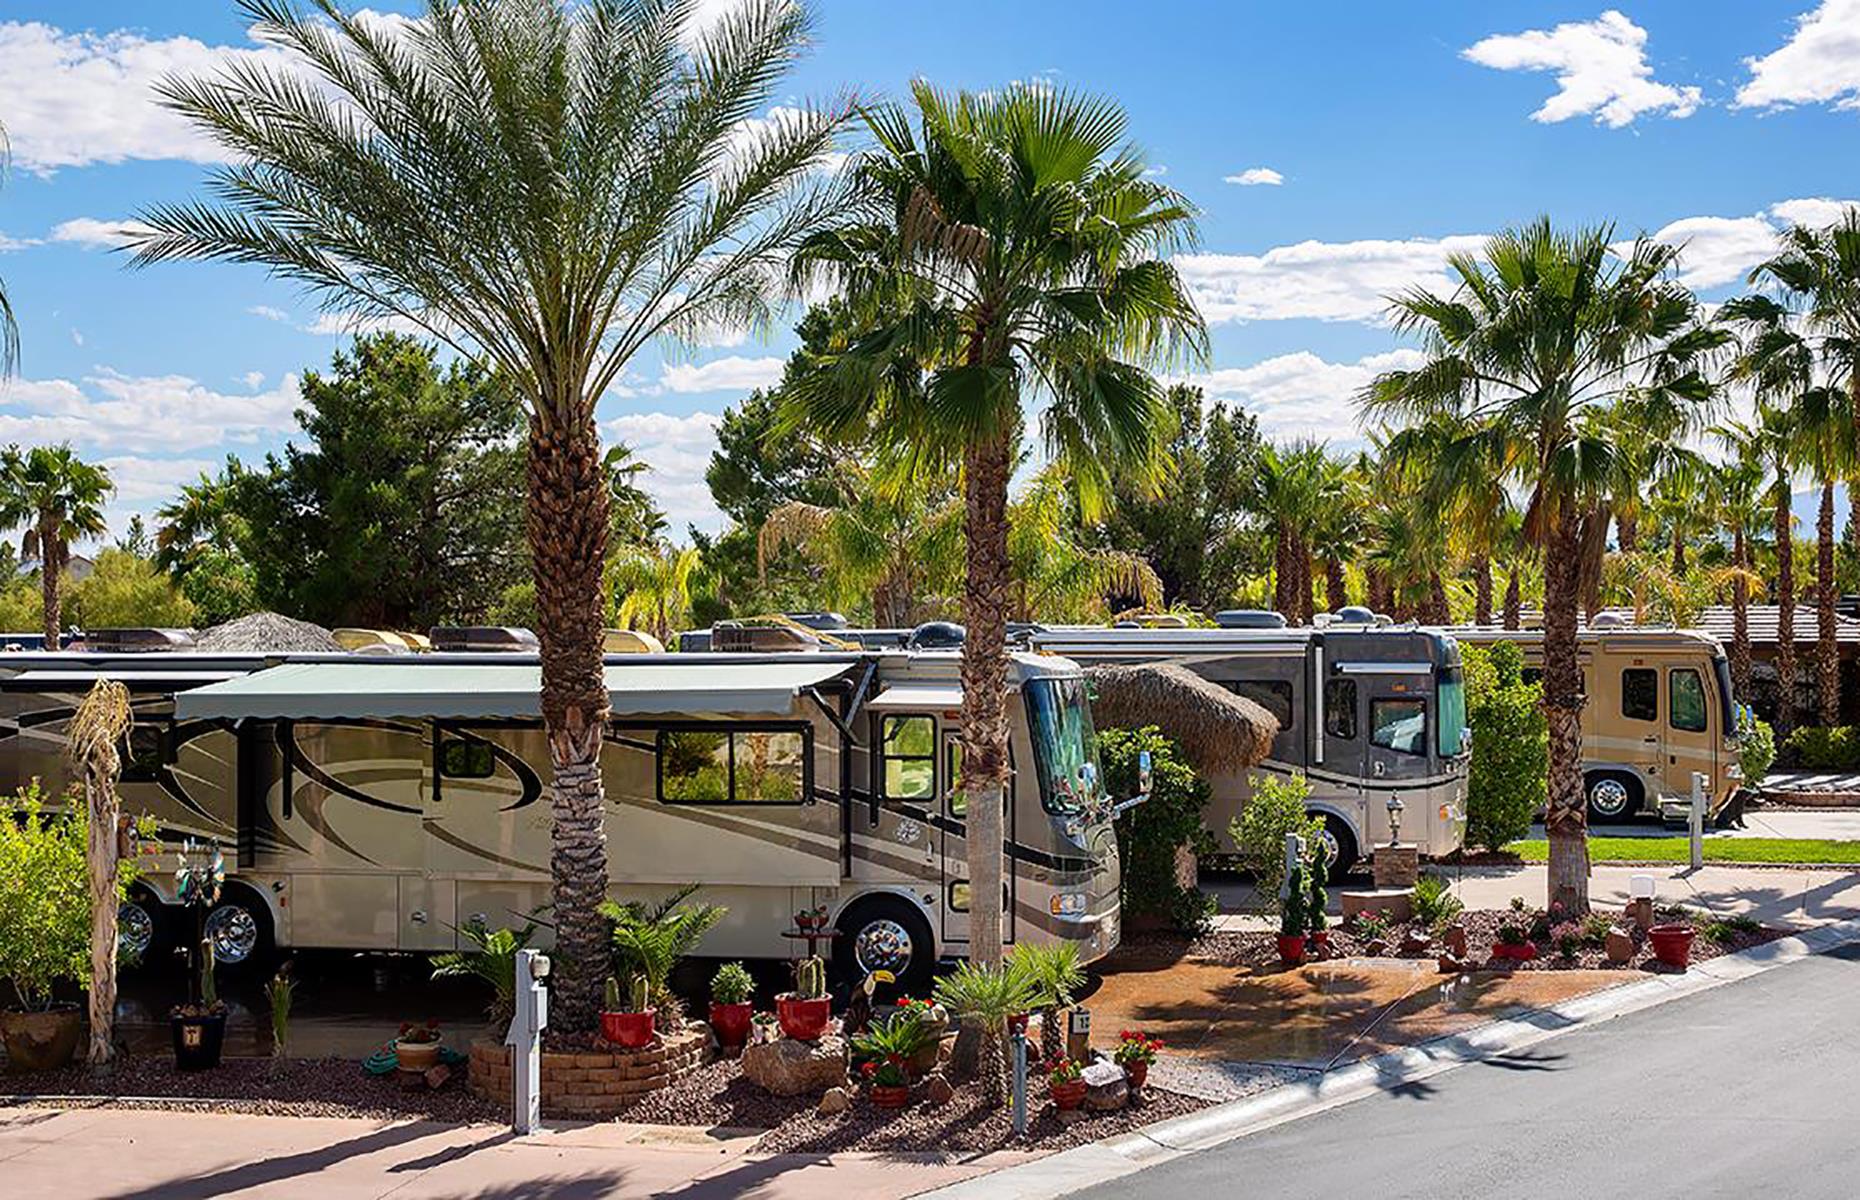 <p><a href="http://www.lvmresort.com/">This glossy palm tree-filled park</a> couldn't be anywhere other than Vegas. You can park your RV on a state-of-the-art lot with full hook-up and then take a dip in the refreshing swimming pool. The site is hailed for its luxurious spa and fitness center and its sprawling clubhouse (<a href="https://www.lvmresort.com/amenities/?fbclid=IwAR14sKoyP49_Qhul7b9D8ipPD6b_kGklSHXQVSP_yvx7GaDIG4_U1n9_MAU">check for any updated restrictions before visiting</a>), and the famed Sin City Strip is close by too. </p>